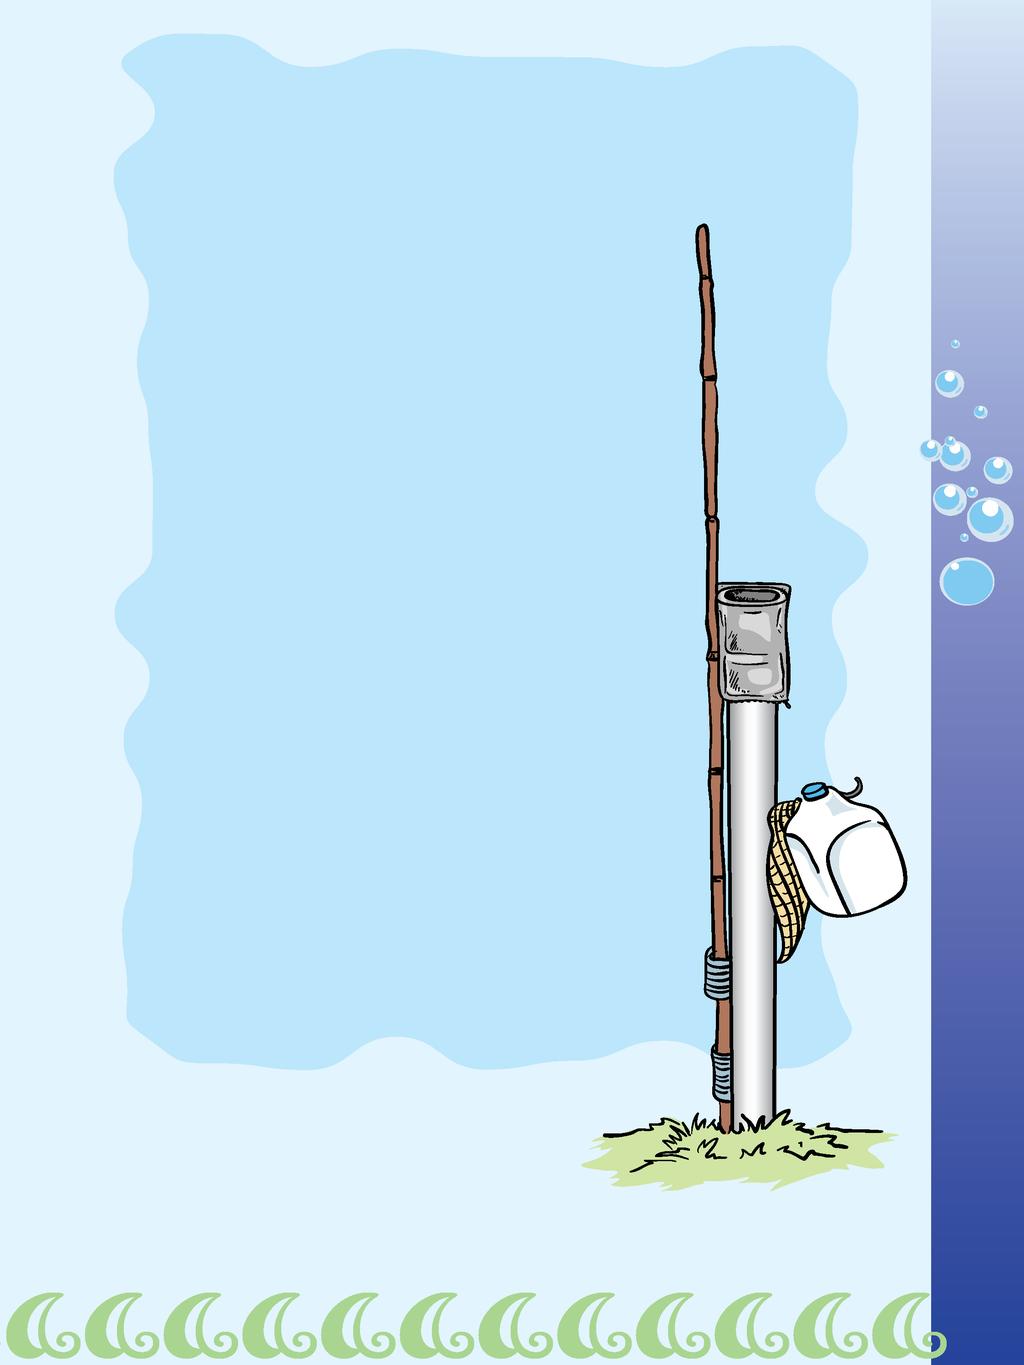 DO IT YOURSELF PROJECT: Make a Safety Post A safety post holds a heaving jug and a reaching pole.